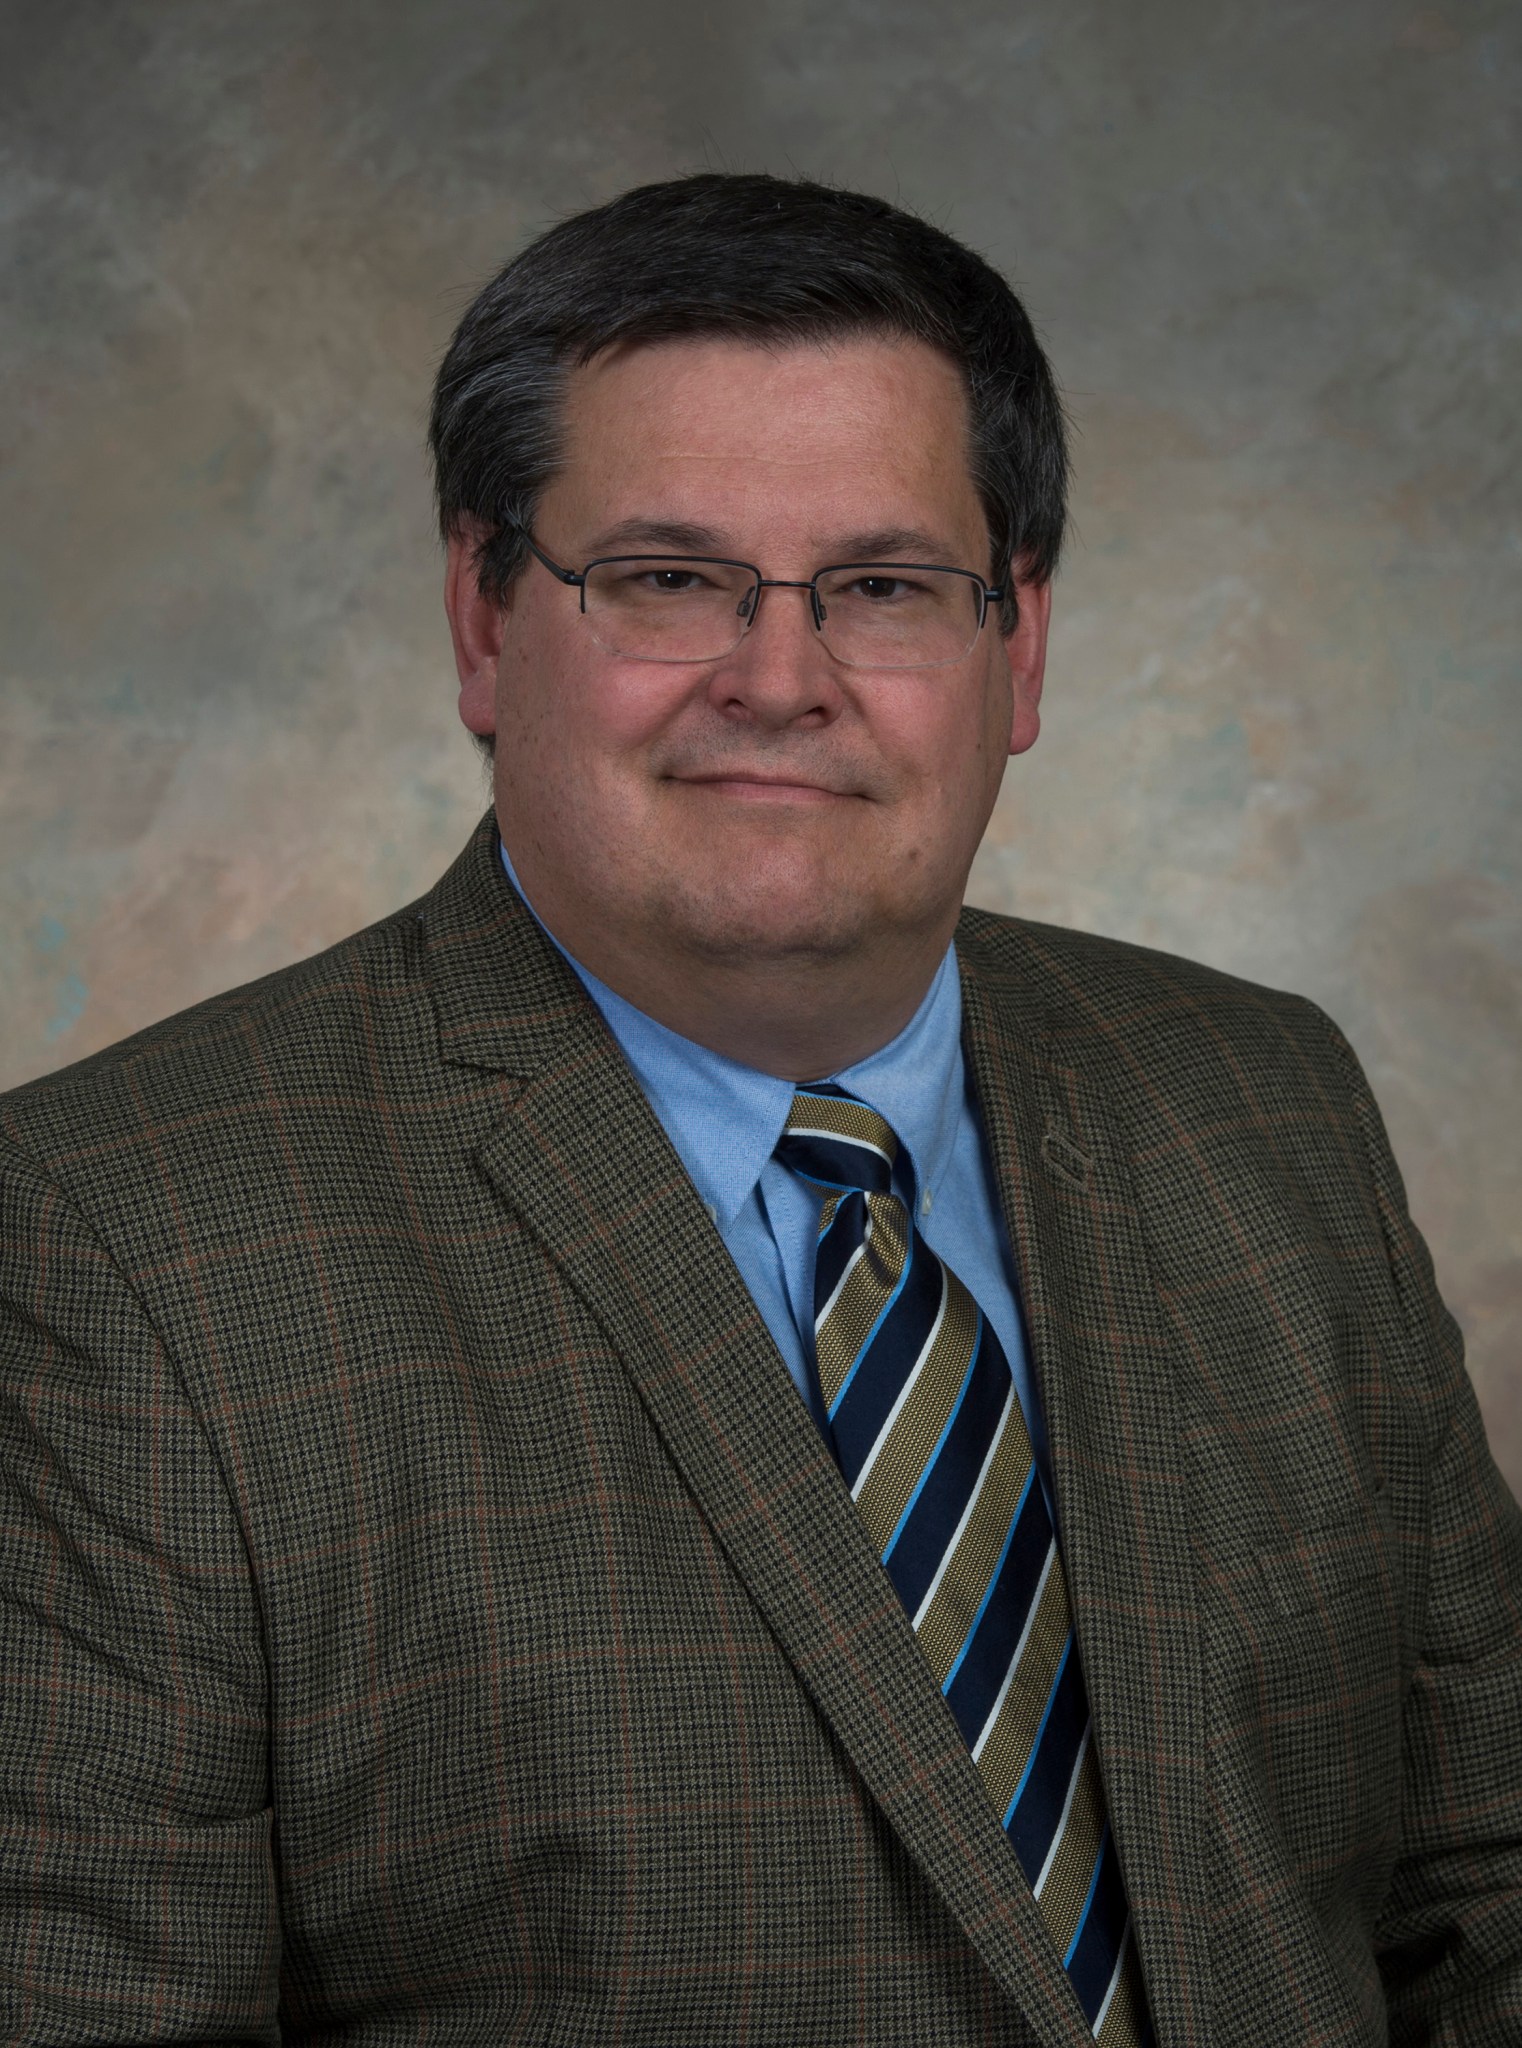 Larry Leopard has been named director of the Engineering Directorate at NASA's Marshall Space Flight Center.